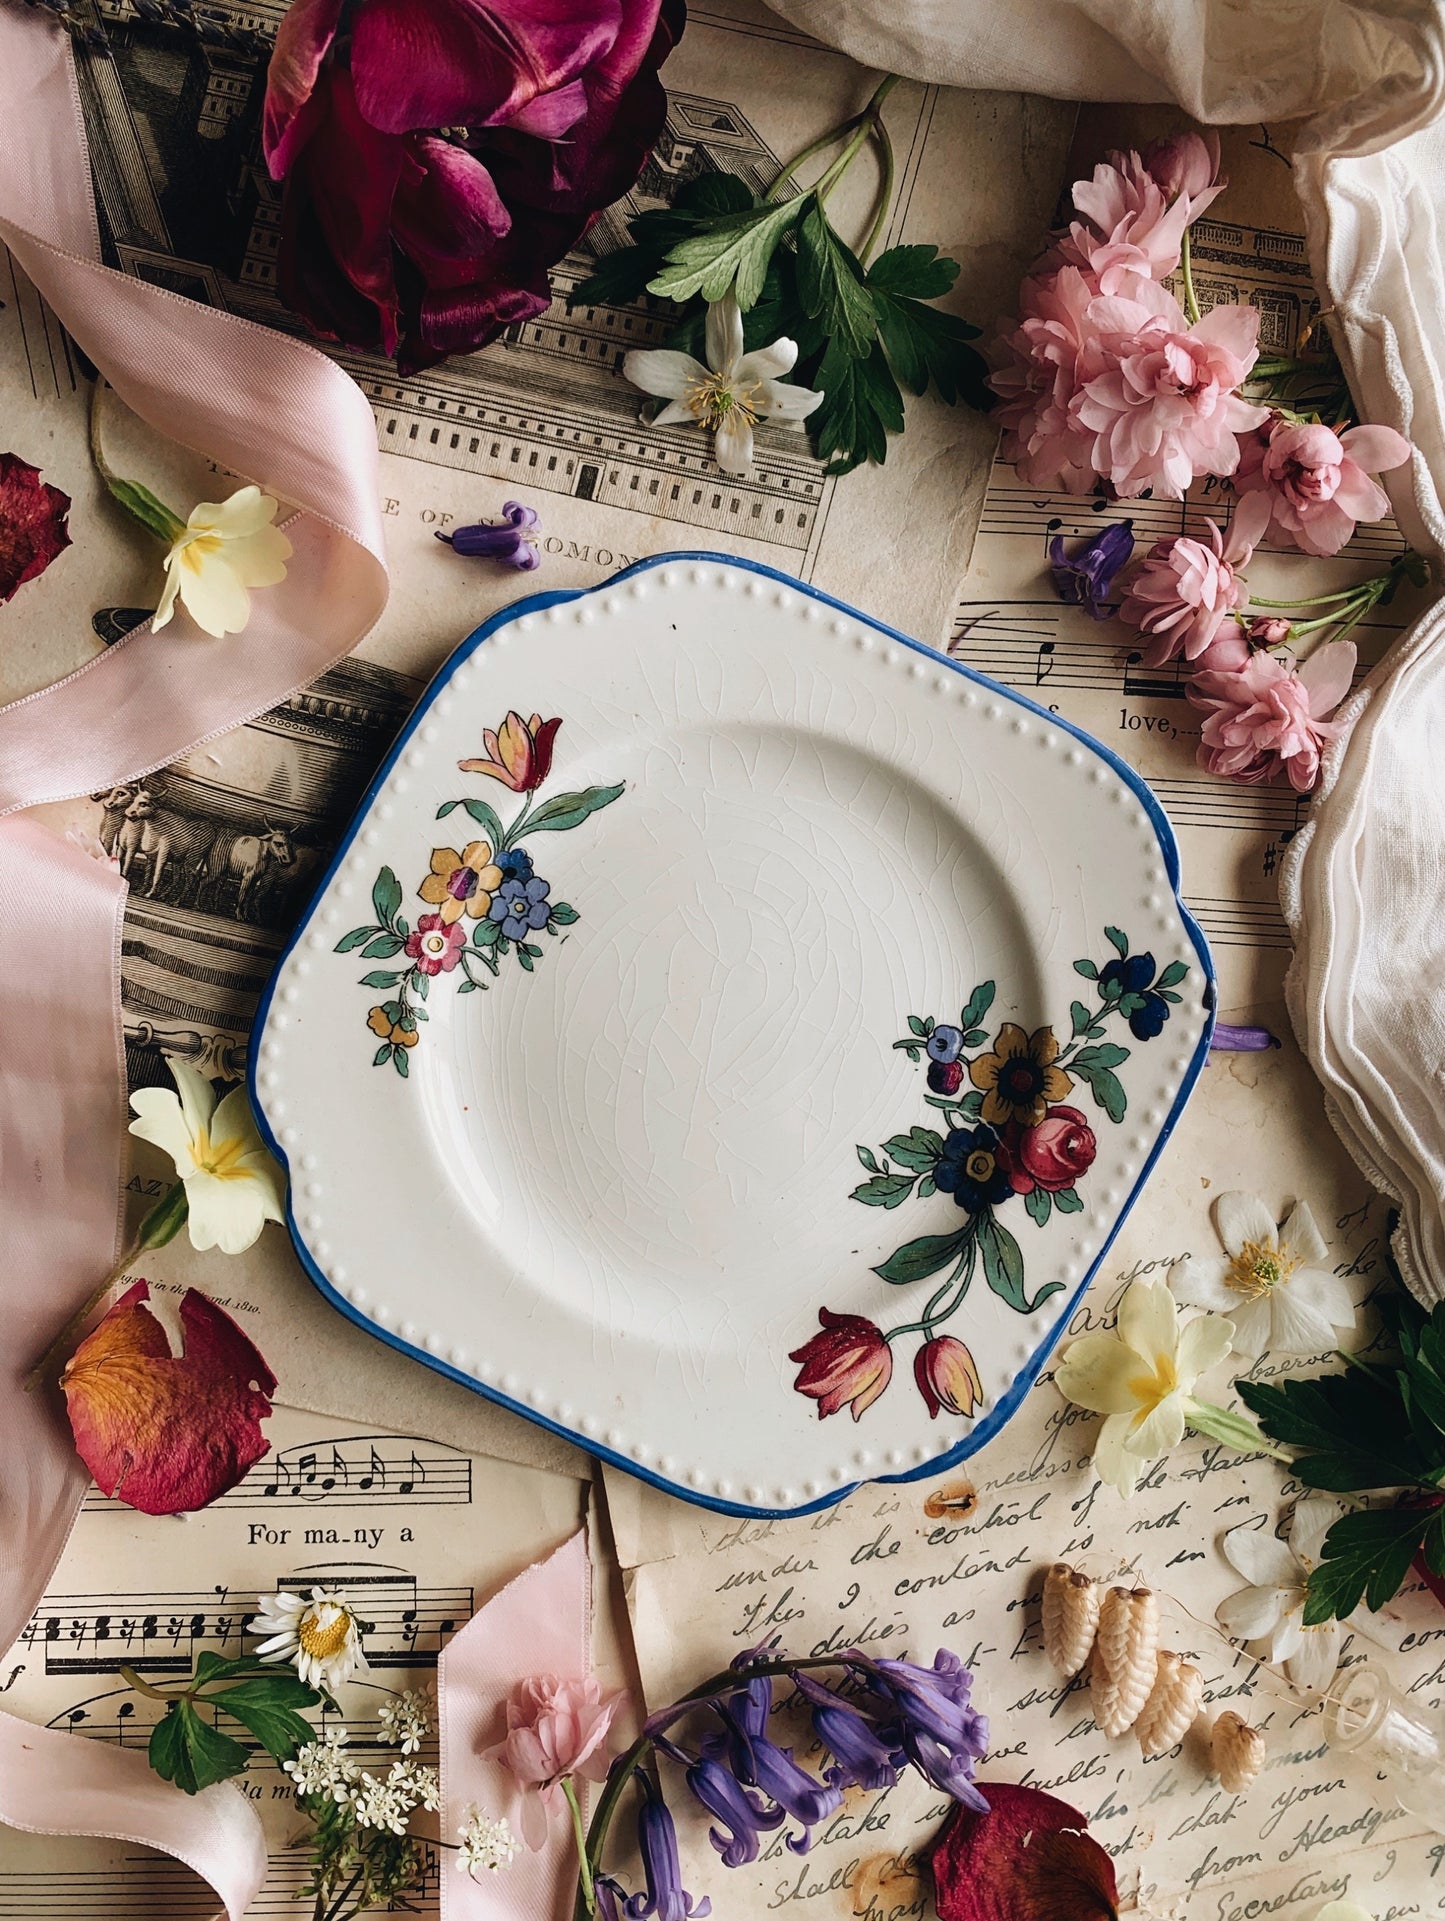 Antique Floral Transfer Side Plates (sold separately four available)